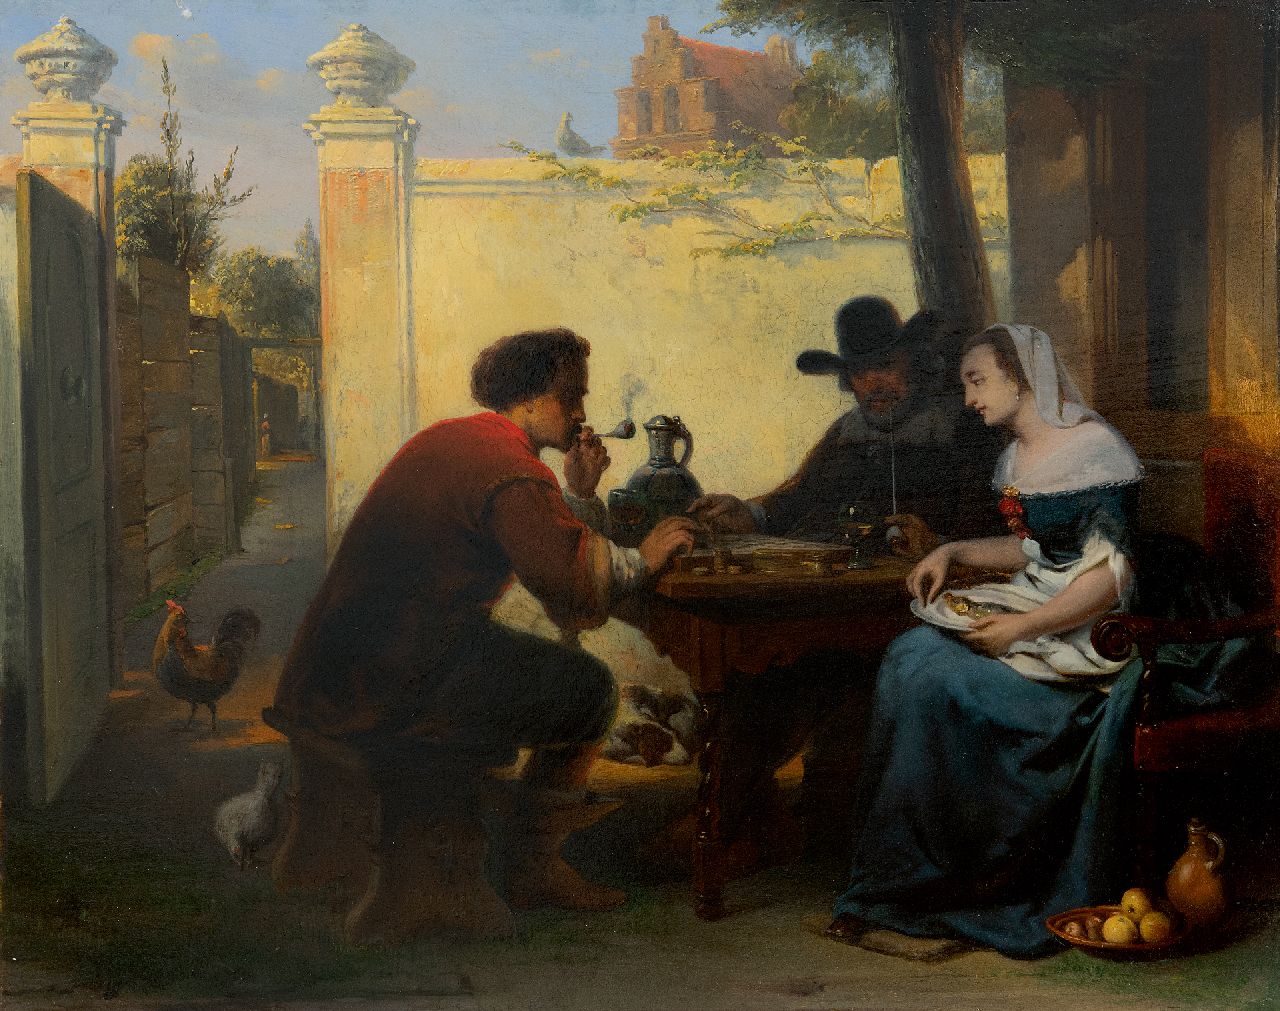 Jan Hendrik van de Laar | Playing checkers in the courtyard, oil on panel, 40.8 x 51.1 cm, signed l.l. on the bench and dated 1864